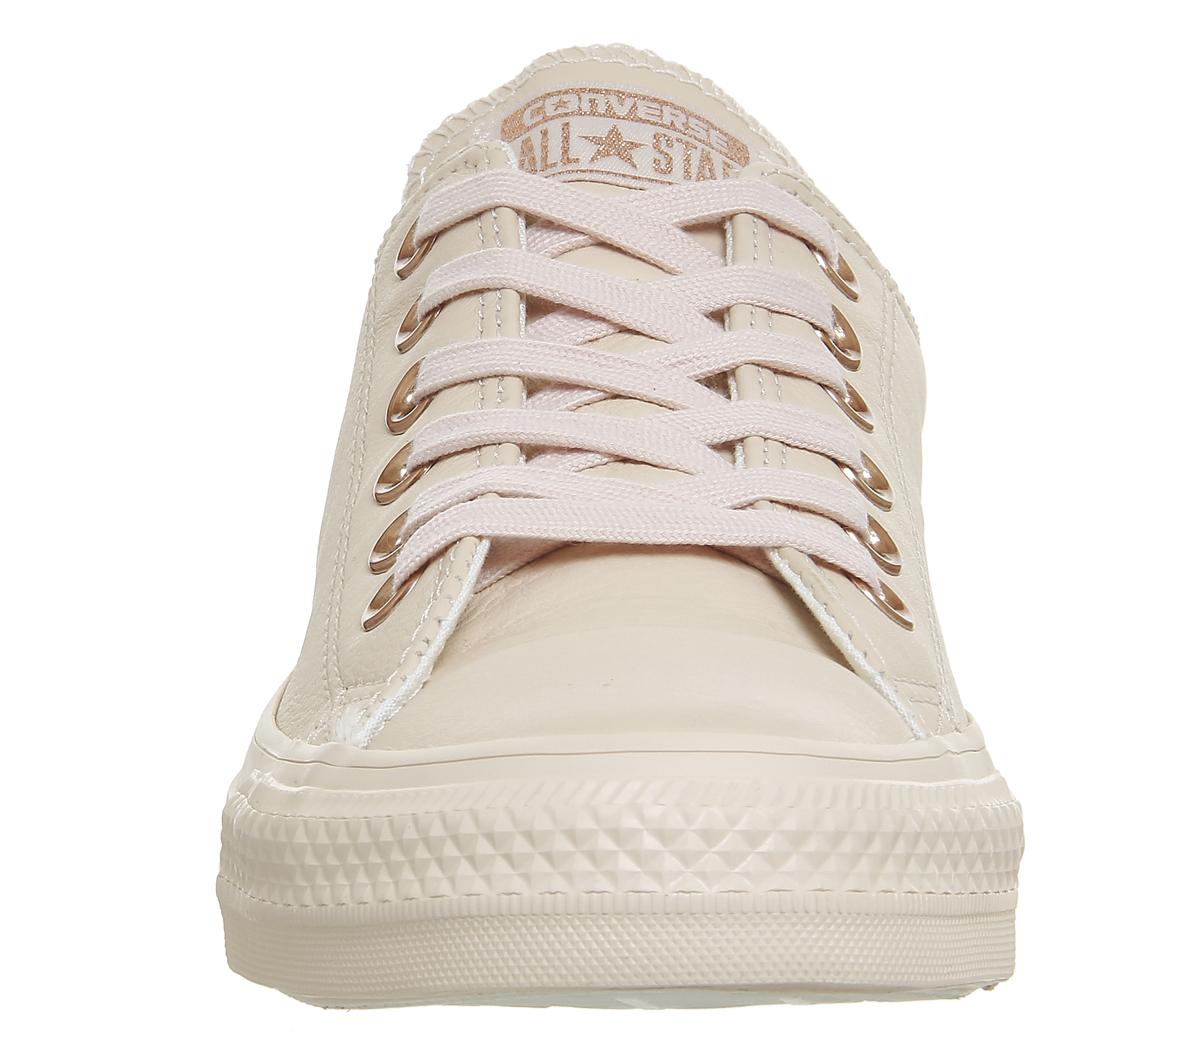 converse allstar low leather pastel rose tan rose gold exclusive